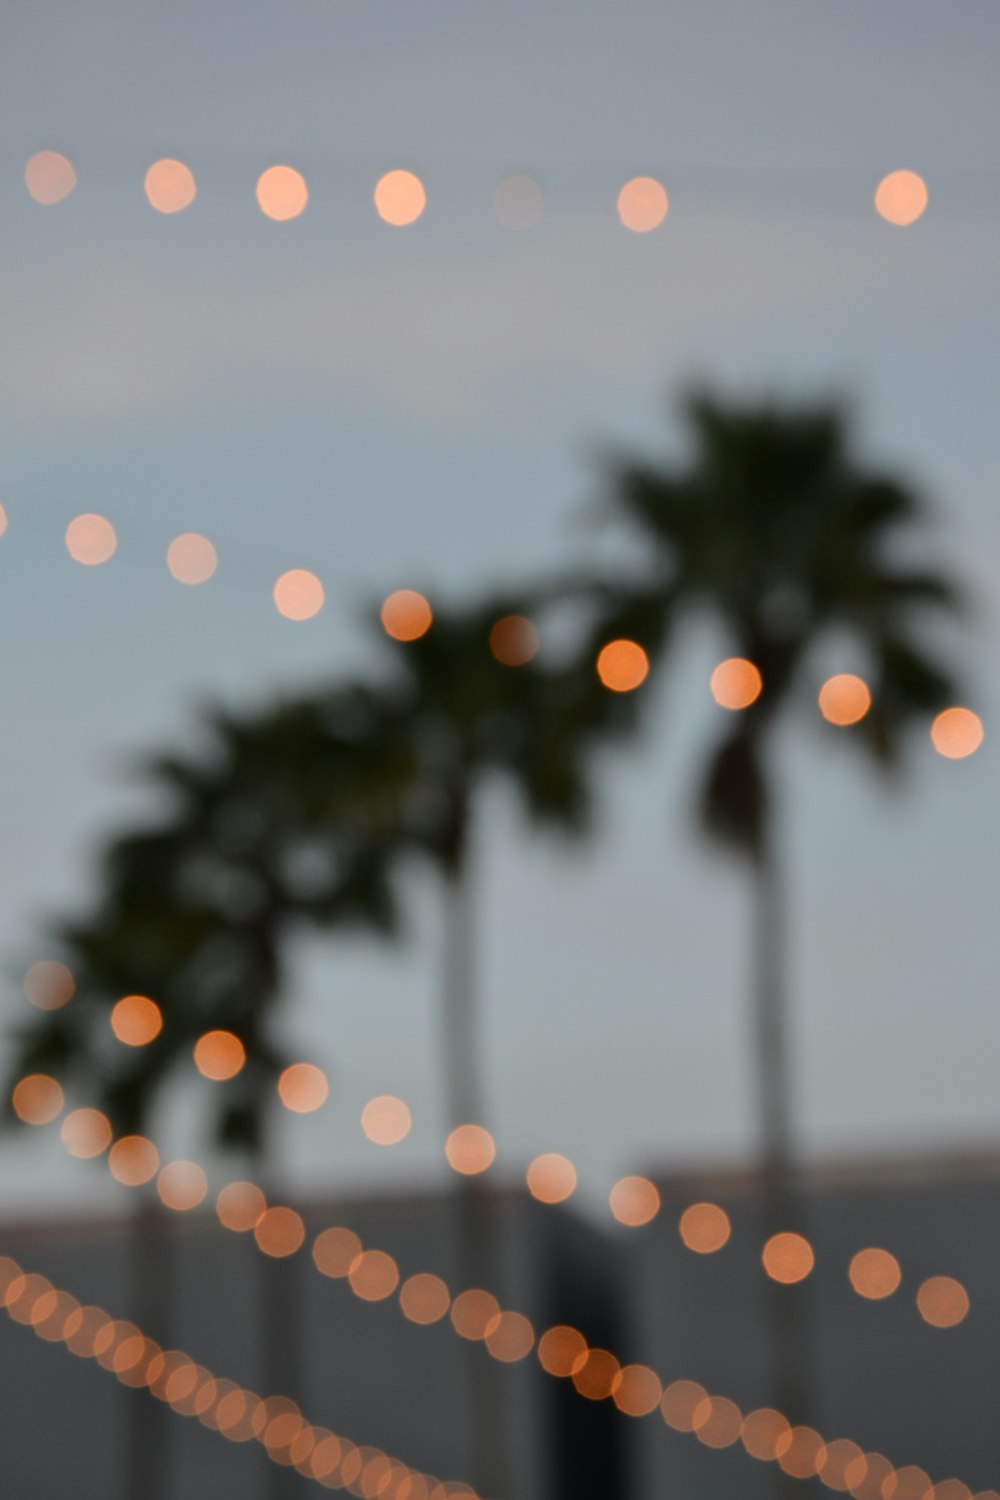 a blurry photo of some palm trees and lights